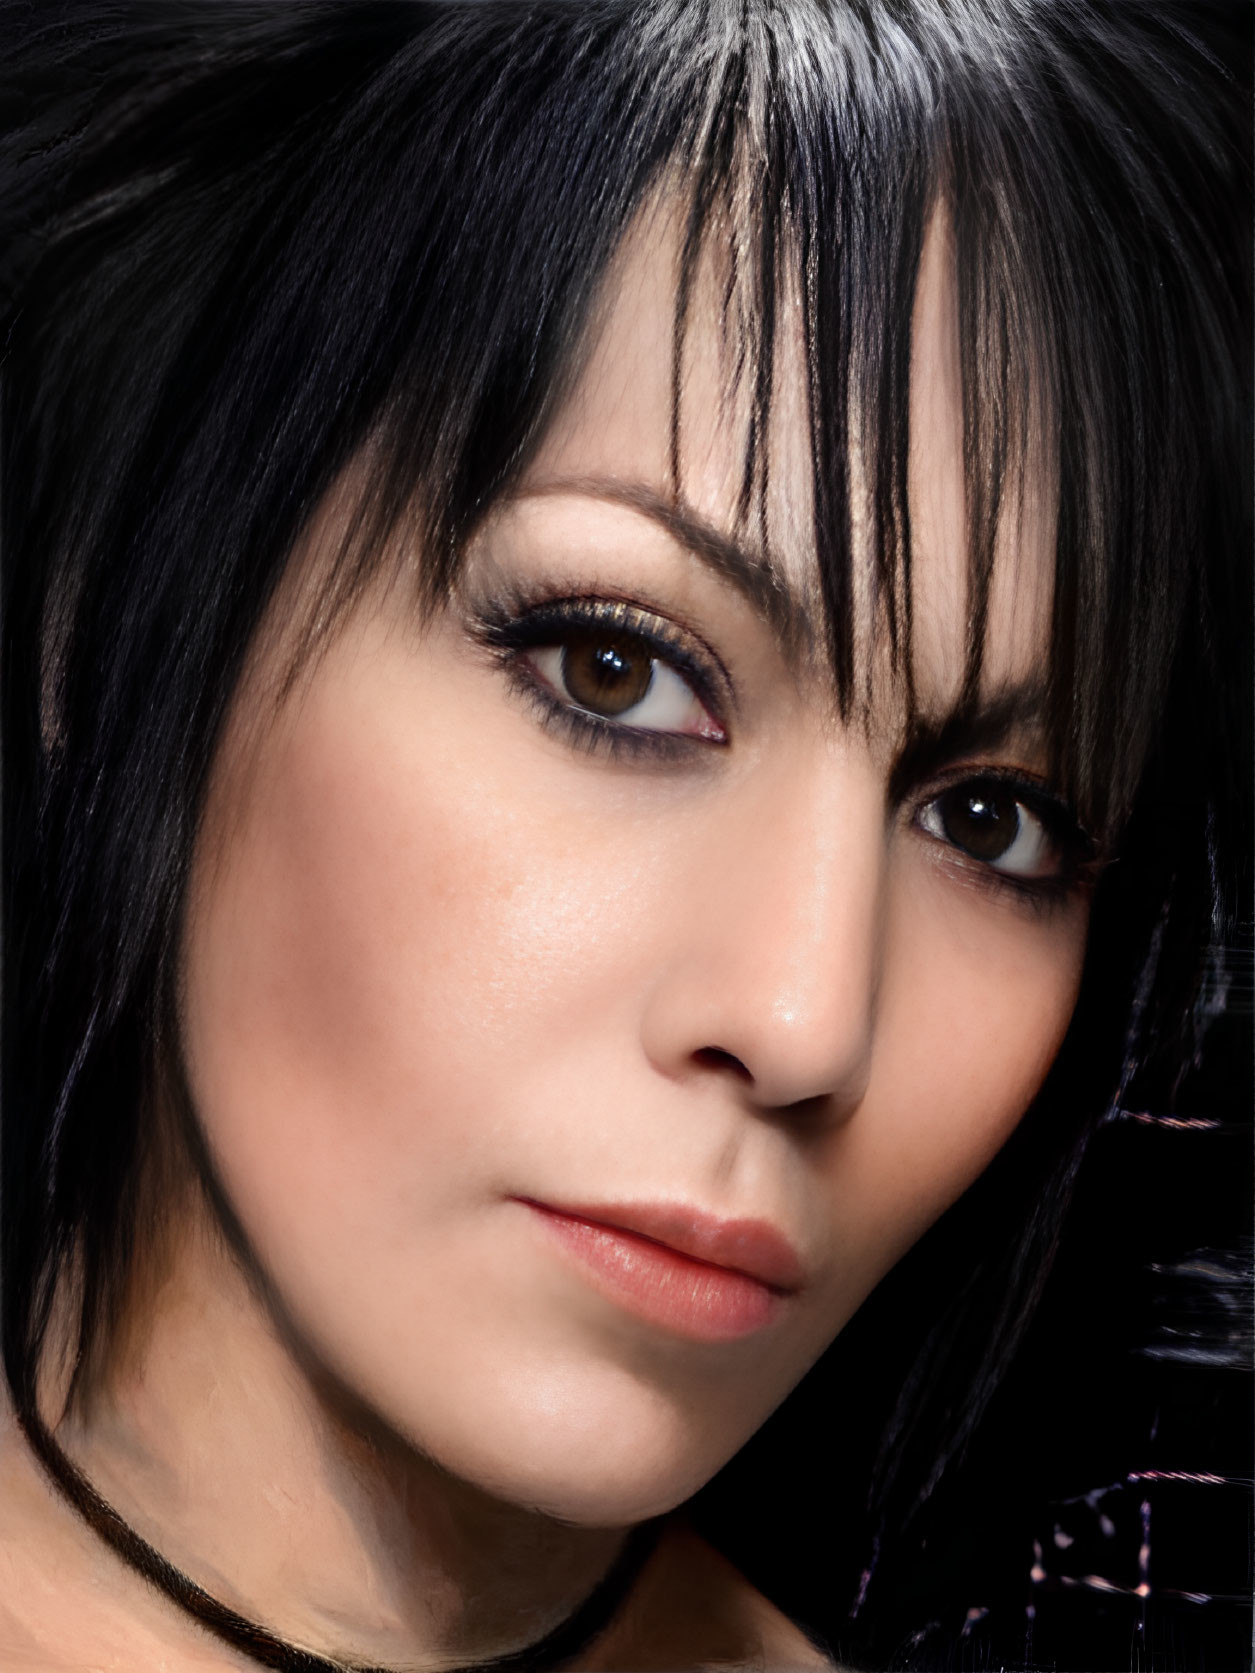 Portrait of woman with dark hair and striking eye makeup.